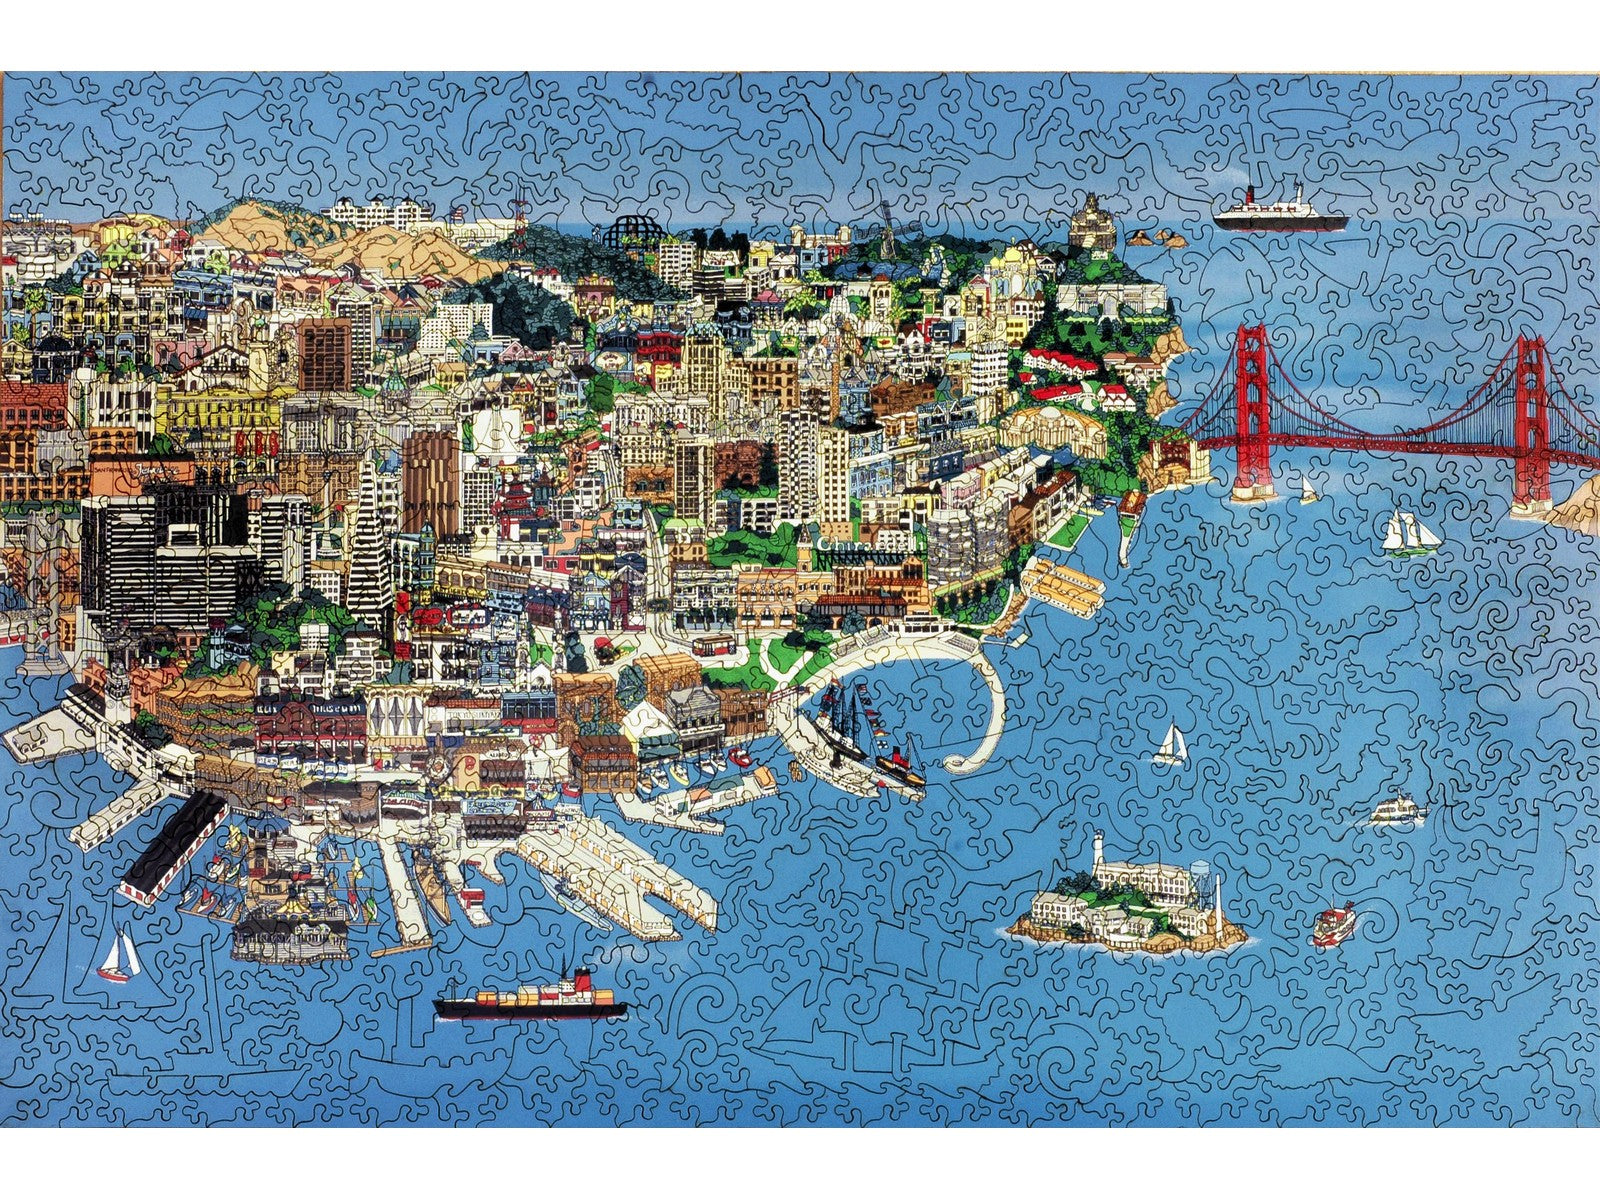 The front of the puzzle, San Francisco, which shows a drawing of the San Francisco bay area.